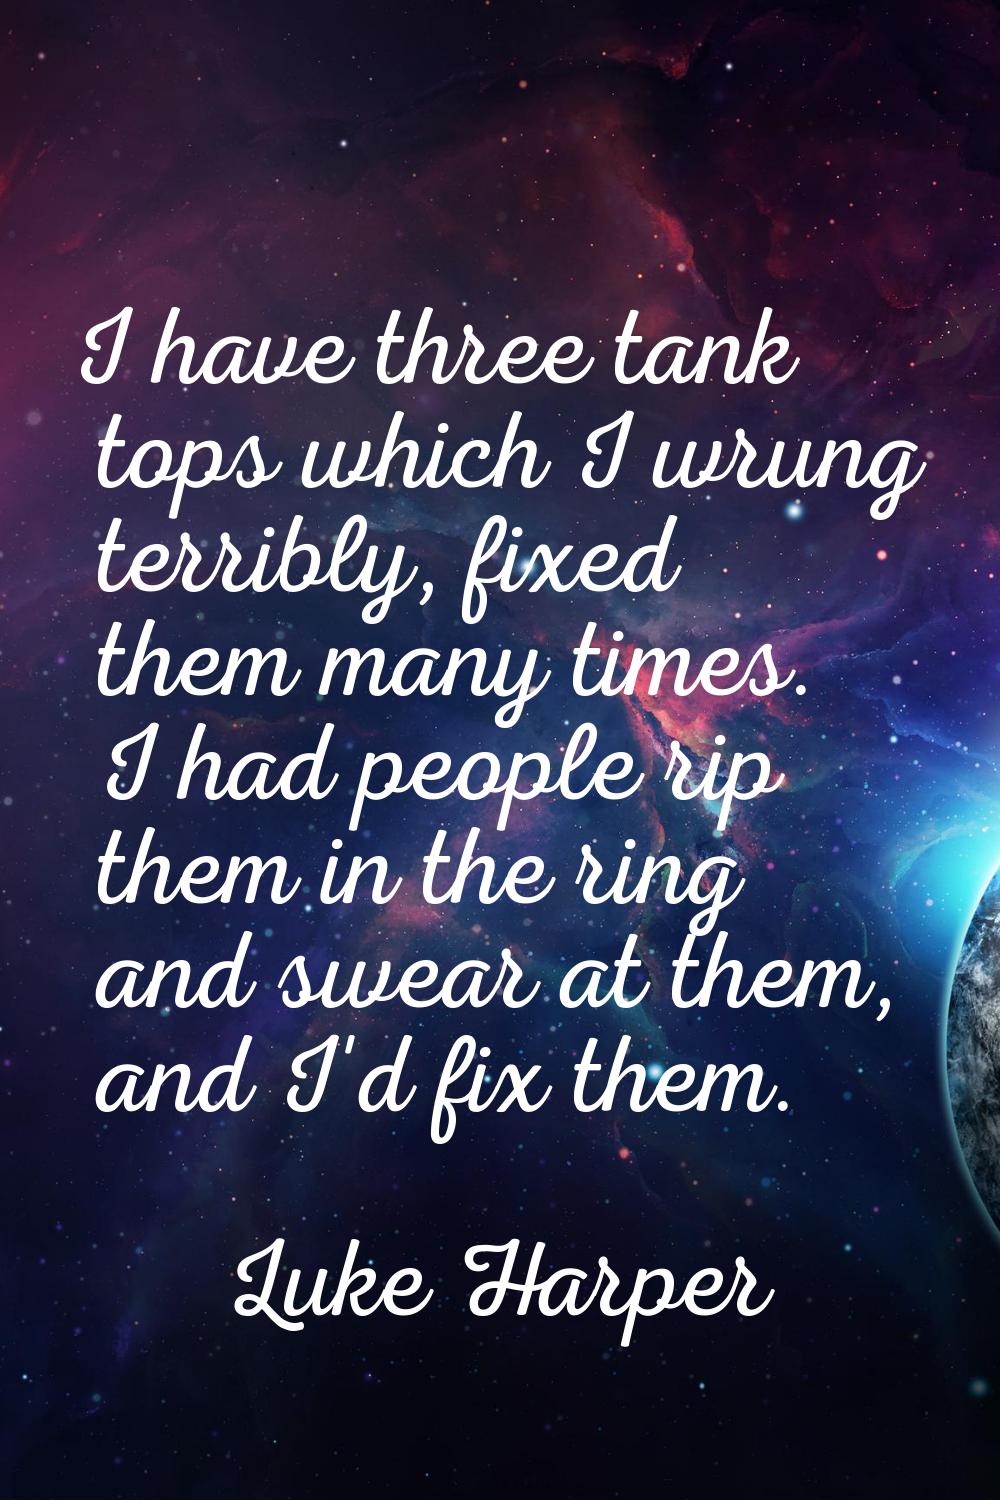 I have three tank tops which I wrung terribly, fixed them many times. I had people rip them in the 